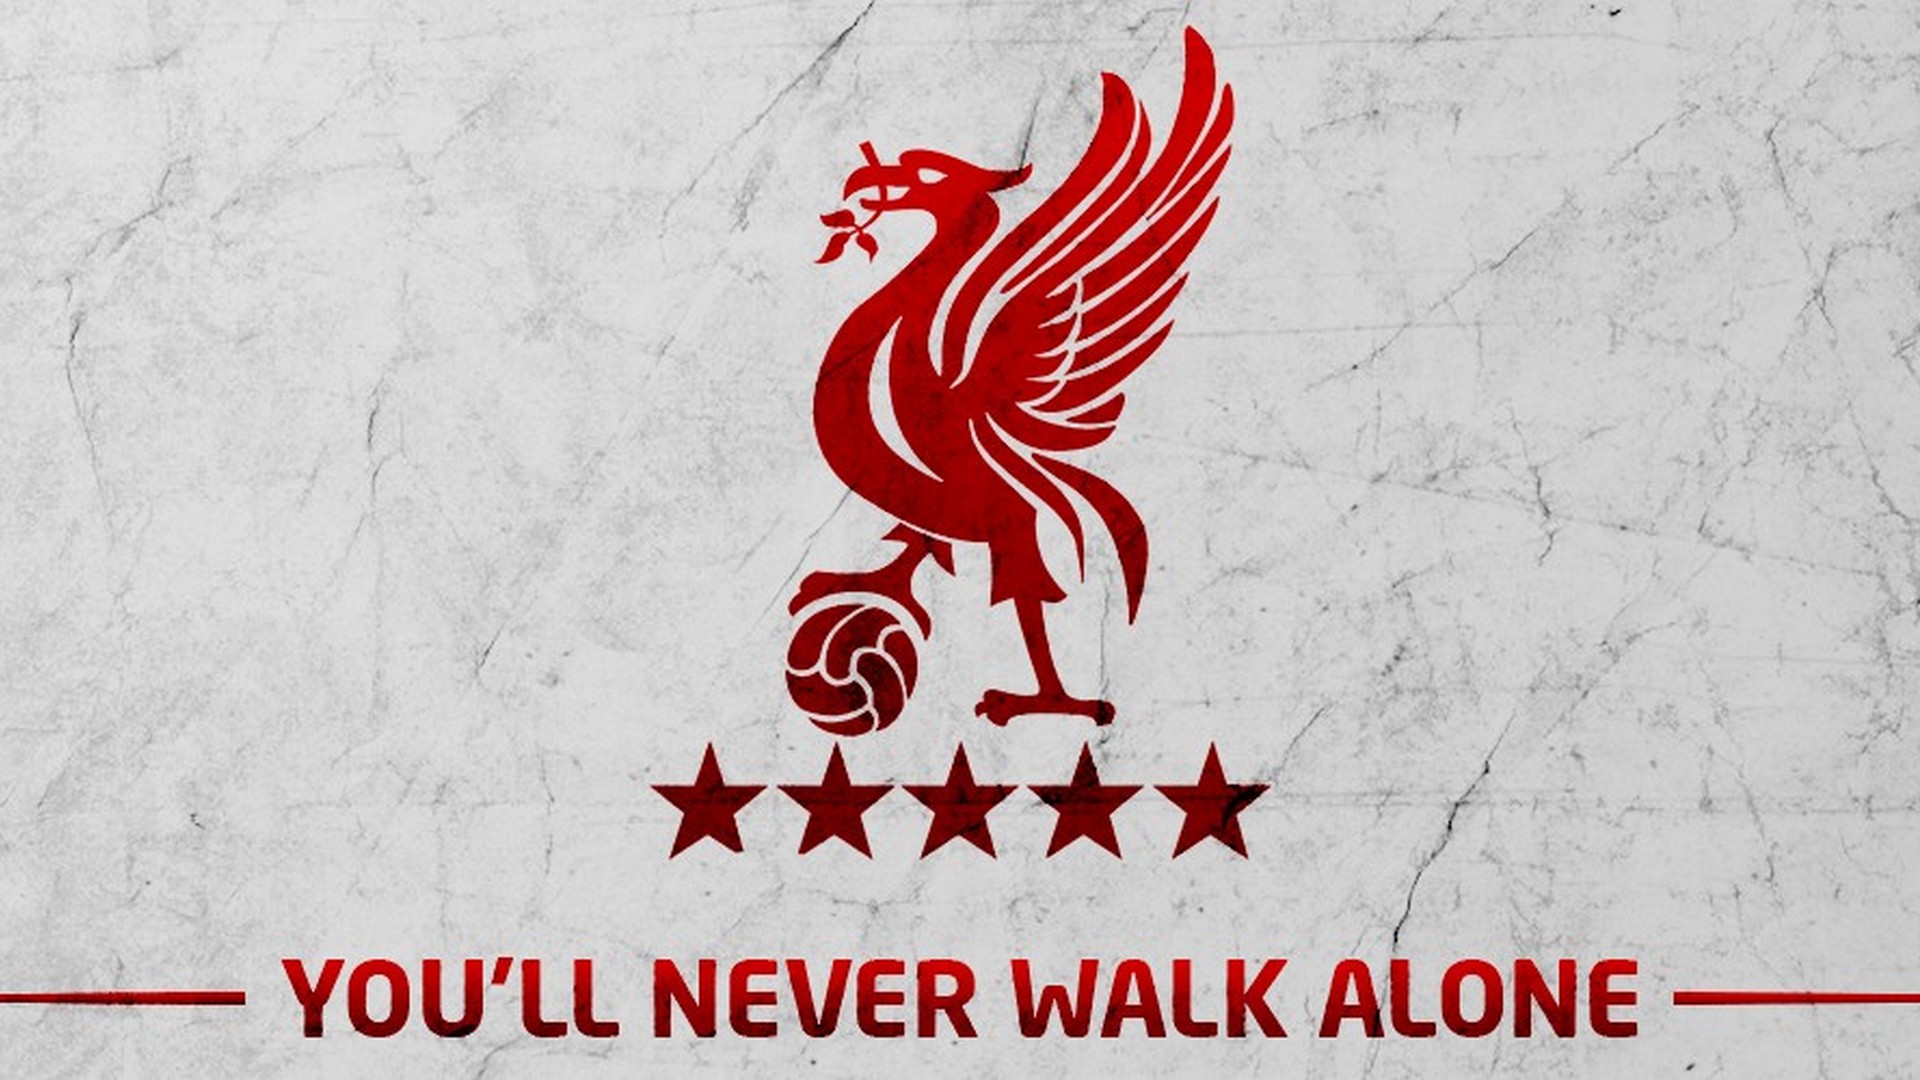 Liverpool Hd Backgrounds With High-resolution Pixel - Liverpool Champions League Stars - HD Wallpaper 